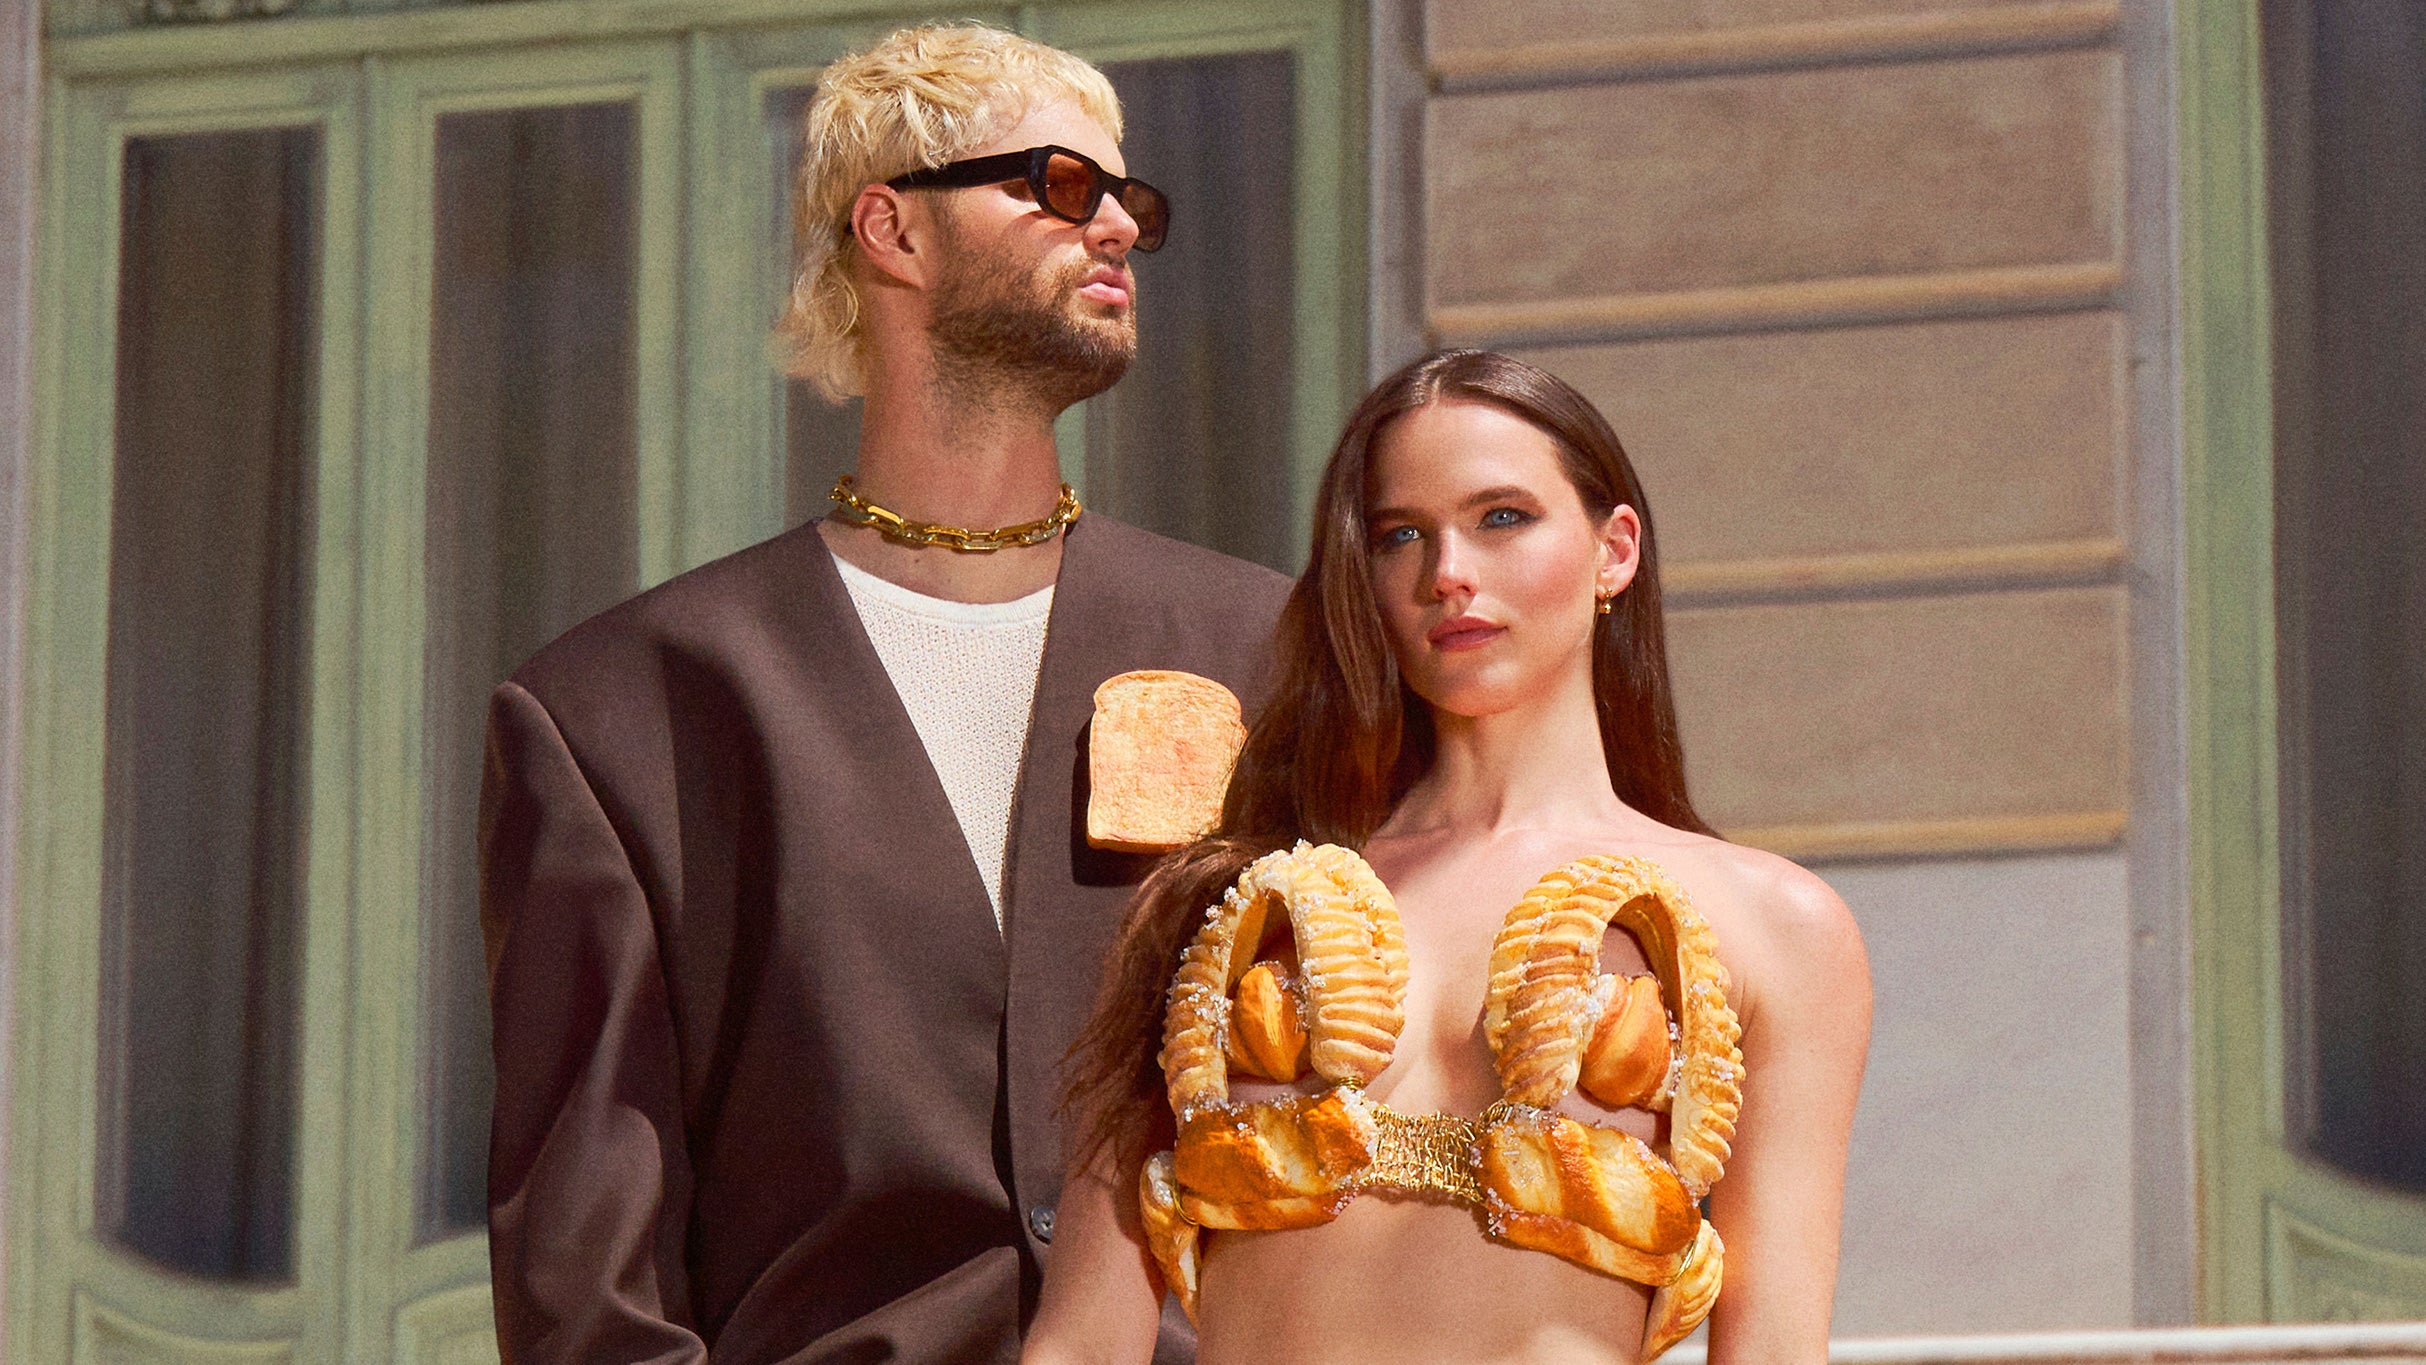 new presale code for SOFI TUKKER - The BREAD Tour tickets in San Francisco at Bill Graham Civic Auditorium